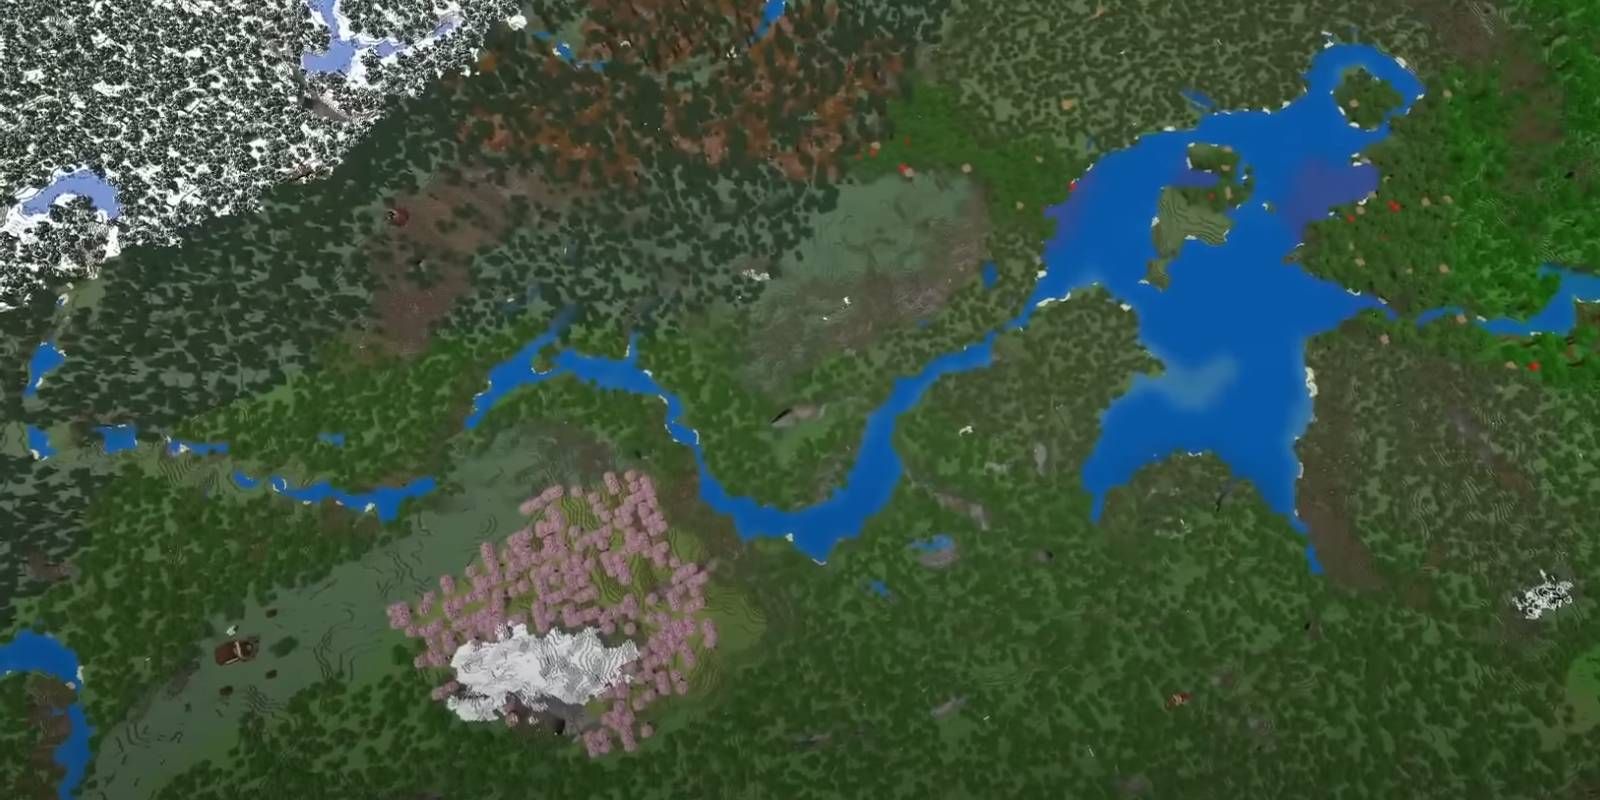 Minecraft River Crossing World from Survival Seed